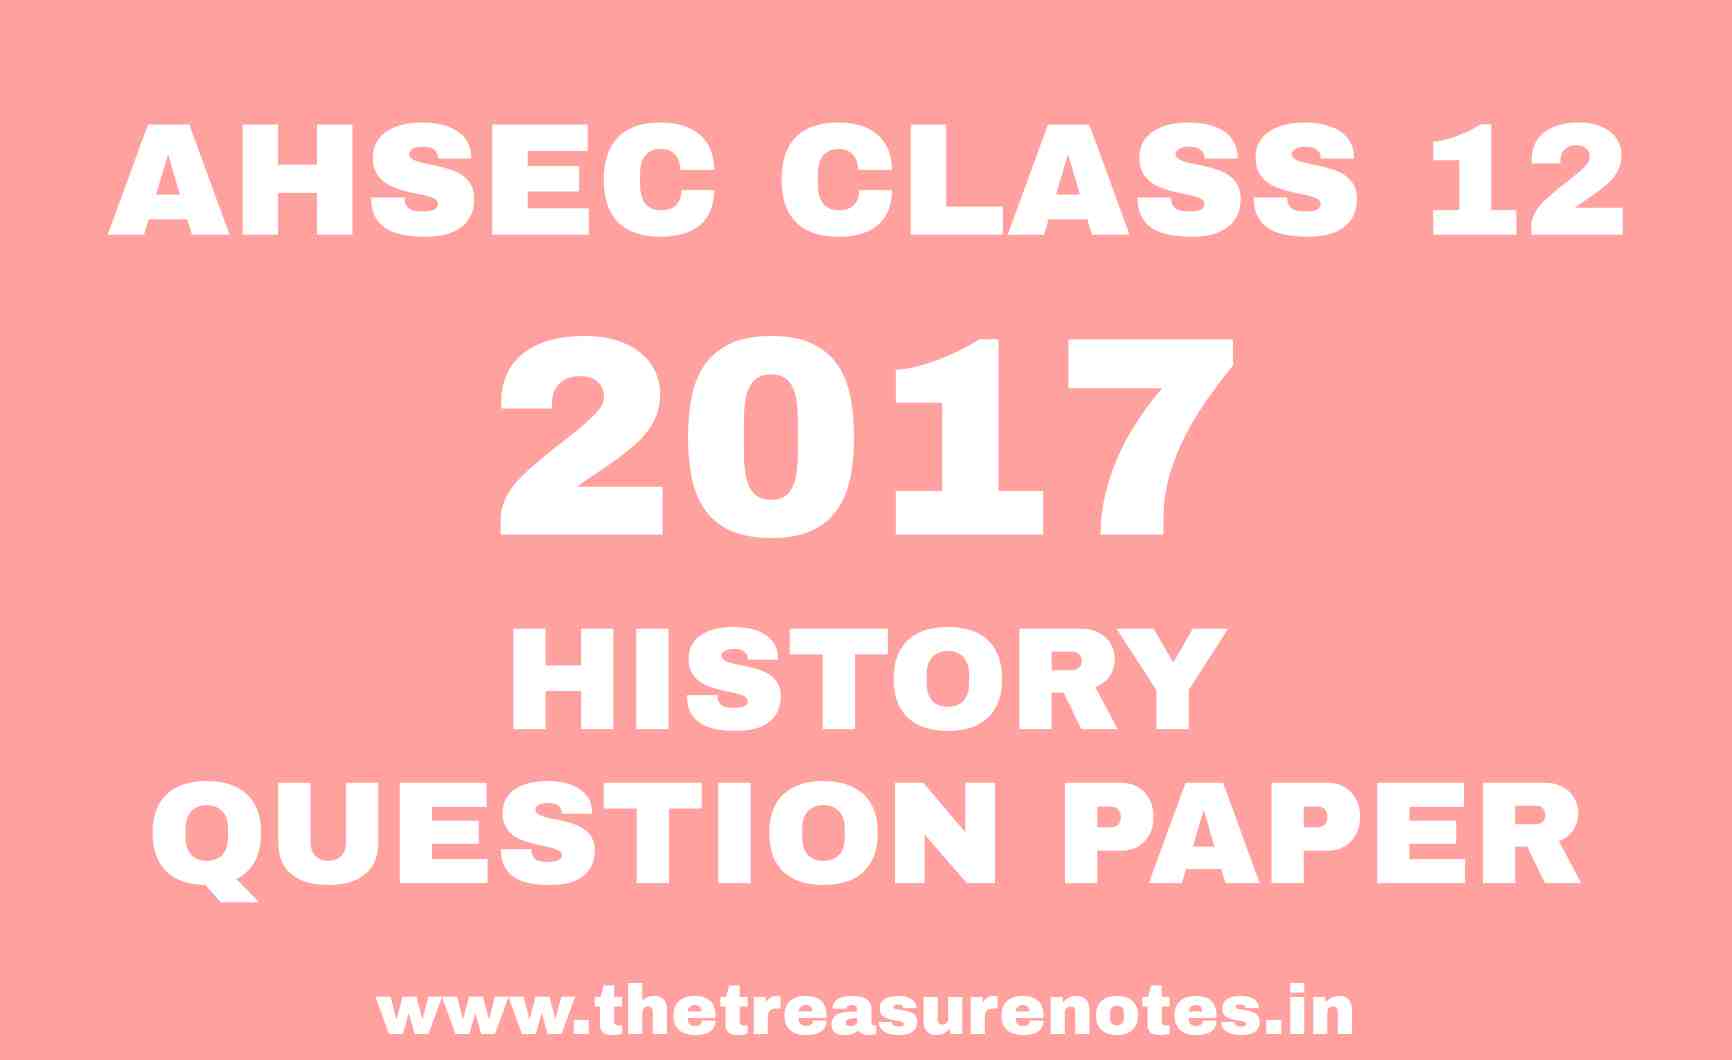 ahsec-class-12-history-questions-paper-2017-hs-2nd-year-history-2017